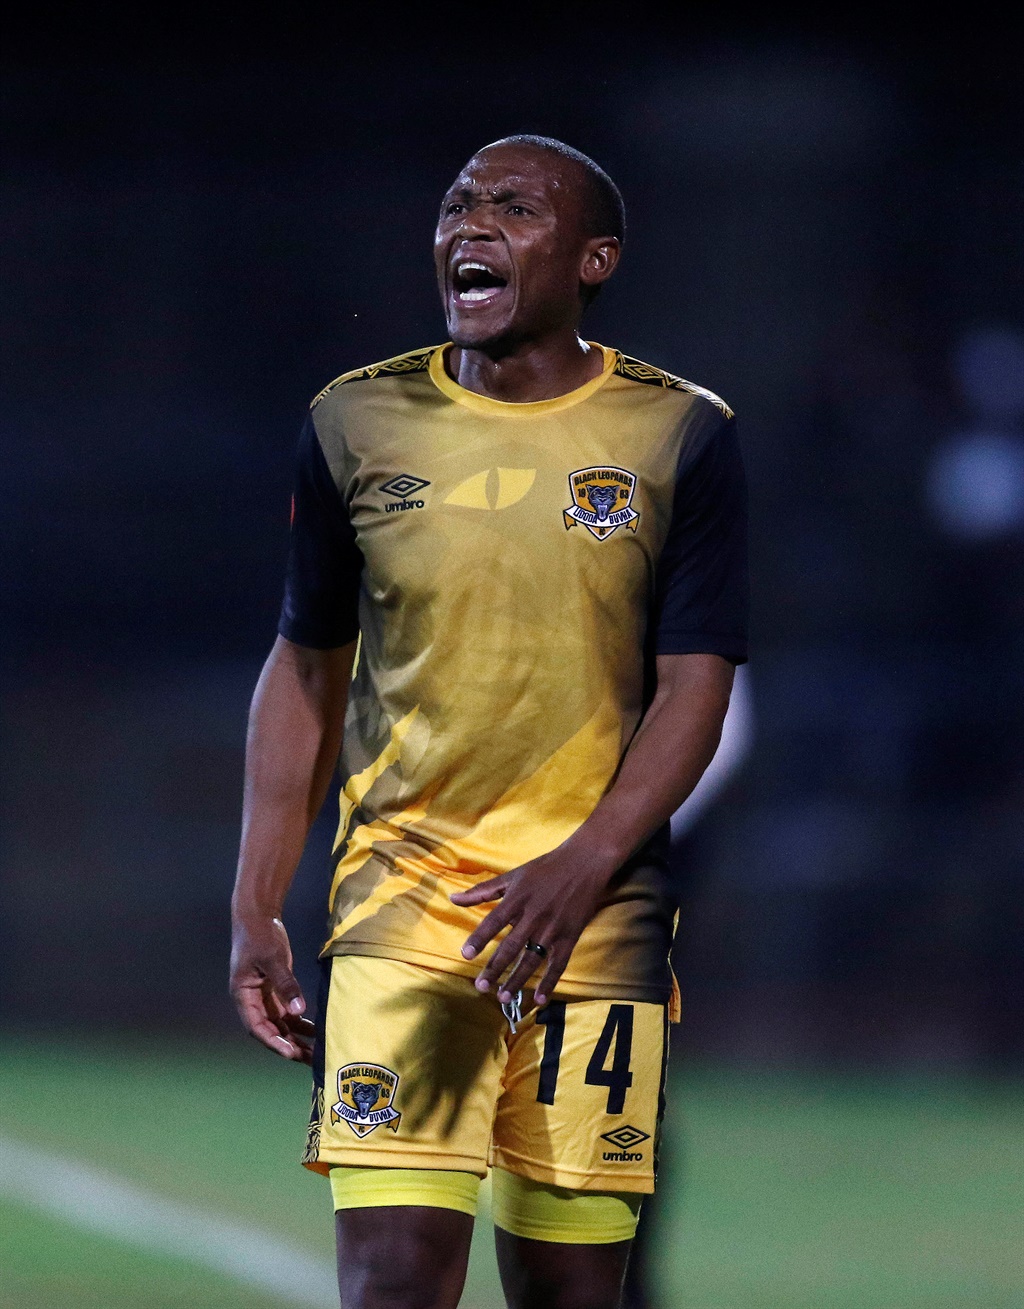 Black Leopards player Thuso Phala is regretting the manner in which he left SuperSport United